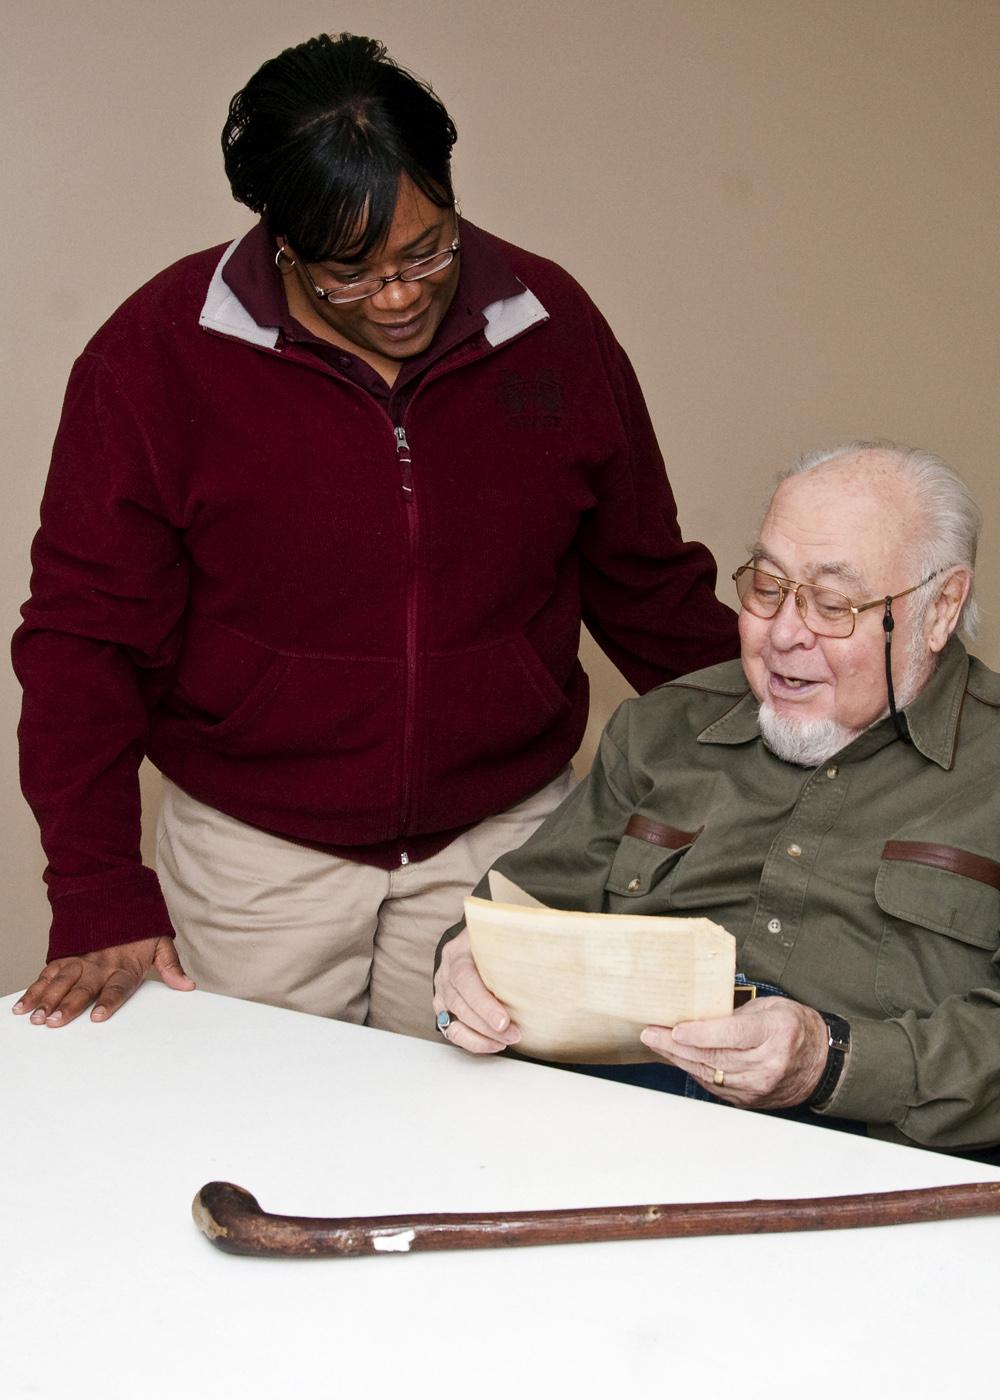 Clay County 4-H agent Fran Brock and volunteer leader Norman Armstrong look over one of his old scripts from a radio program he did as a member and leader to promote 4-H involvement. (Photo by MSU Ag Communications/Scott Corey)